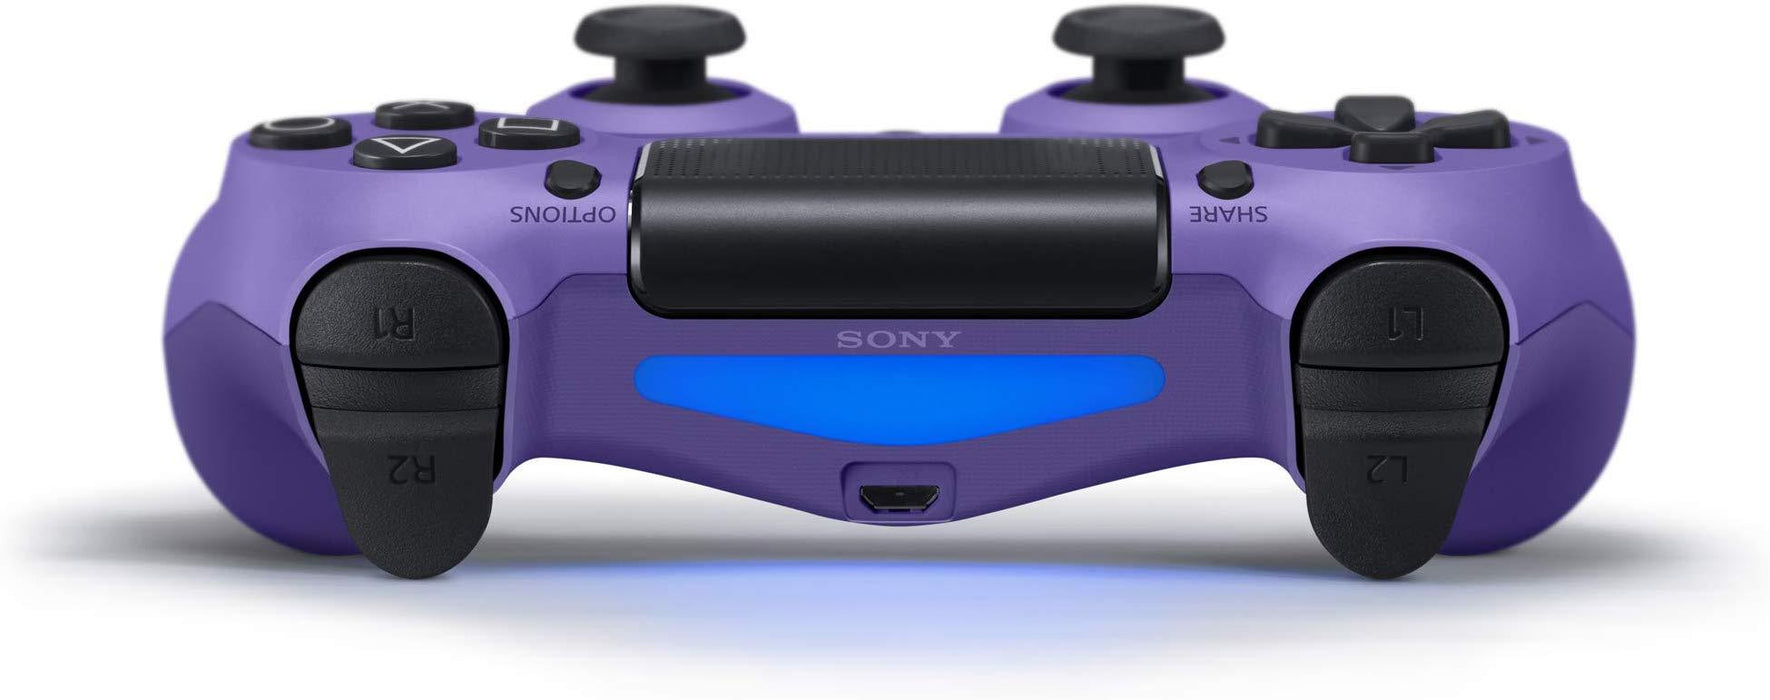 DualShock 4 Wireless Controller - Electric Purple Edition [PlayStation 4 Accessory]